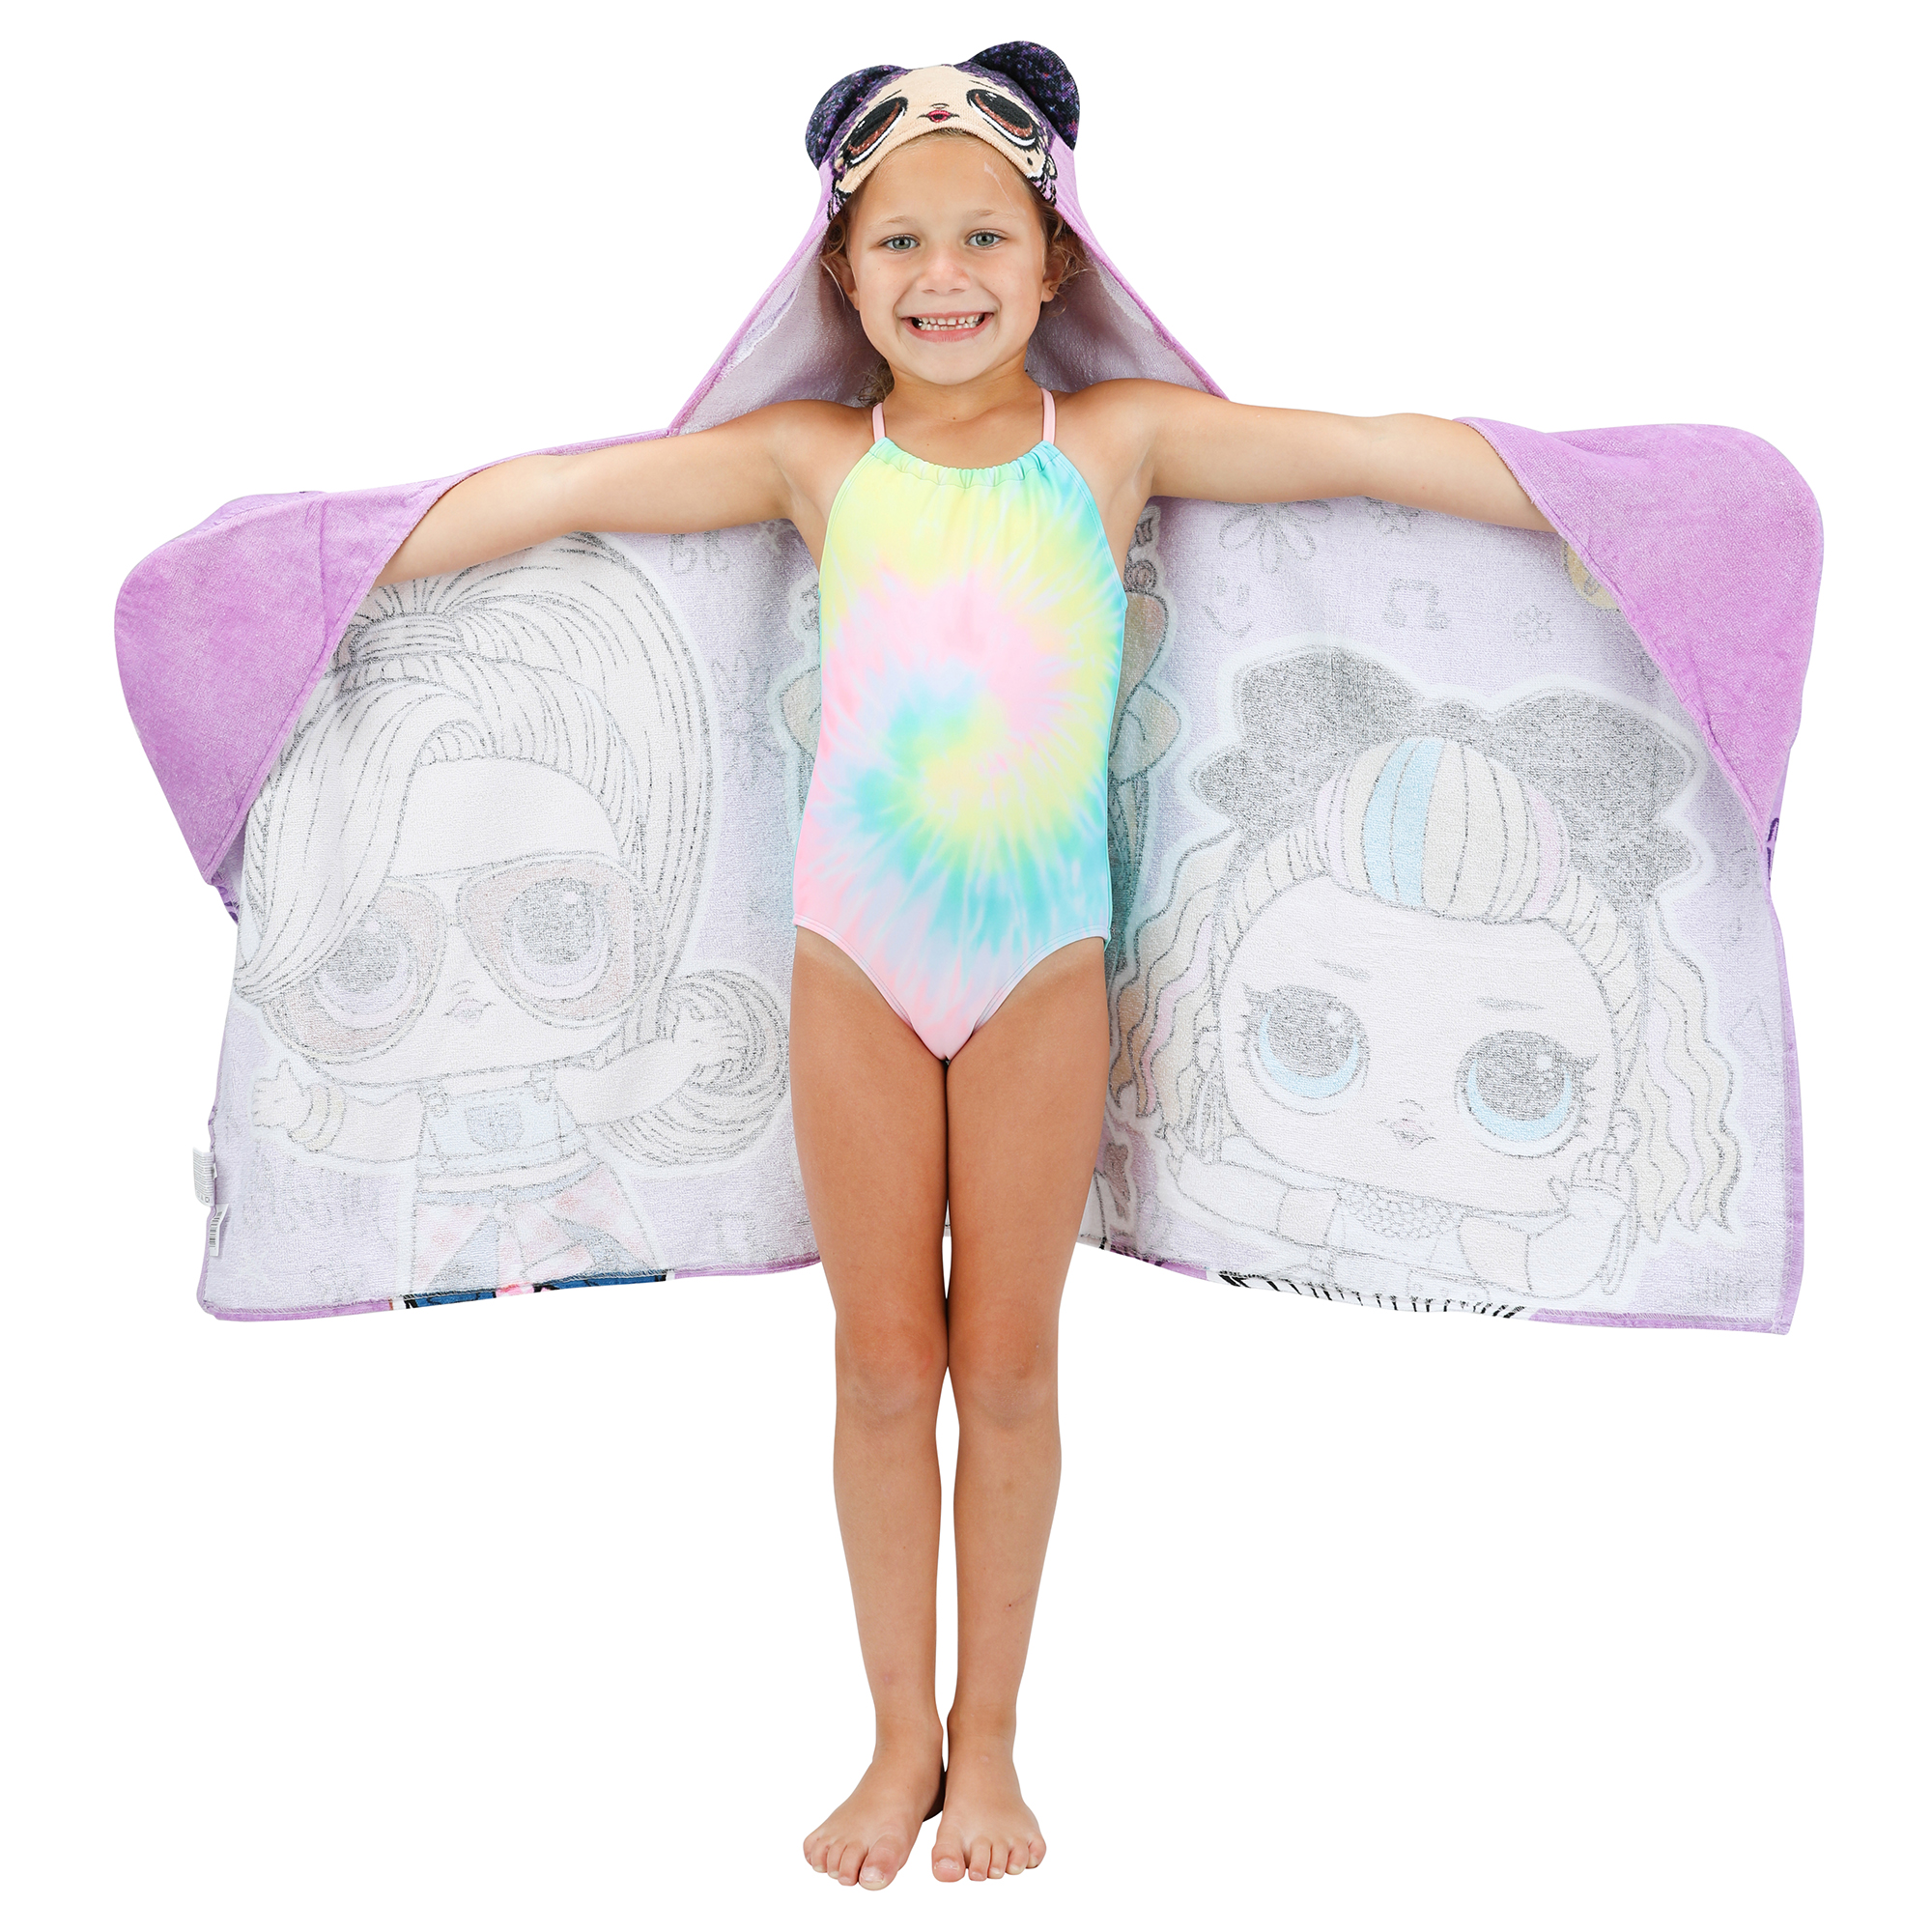 LOL Surprise Kids Purple Queen Hooded Towel, Cotton, Purple, MGA - image 7 of 10